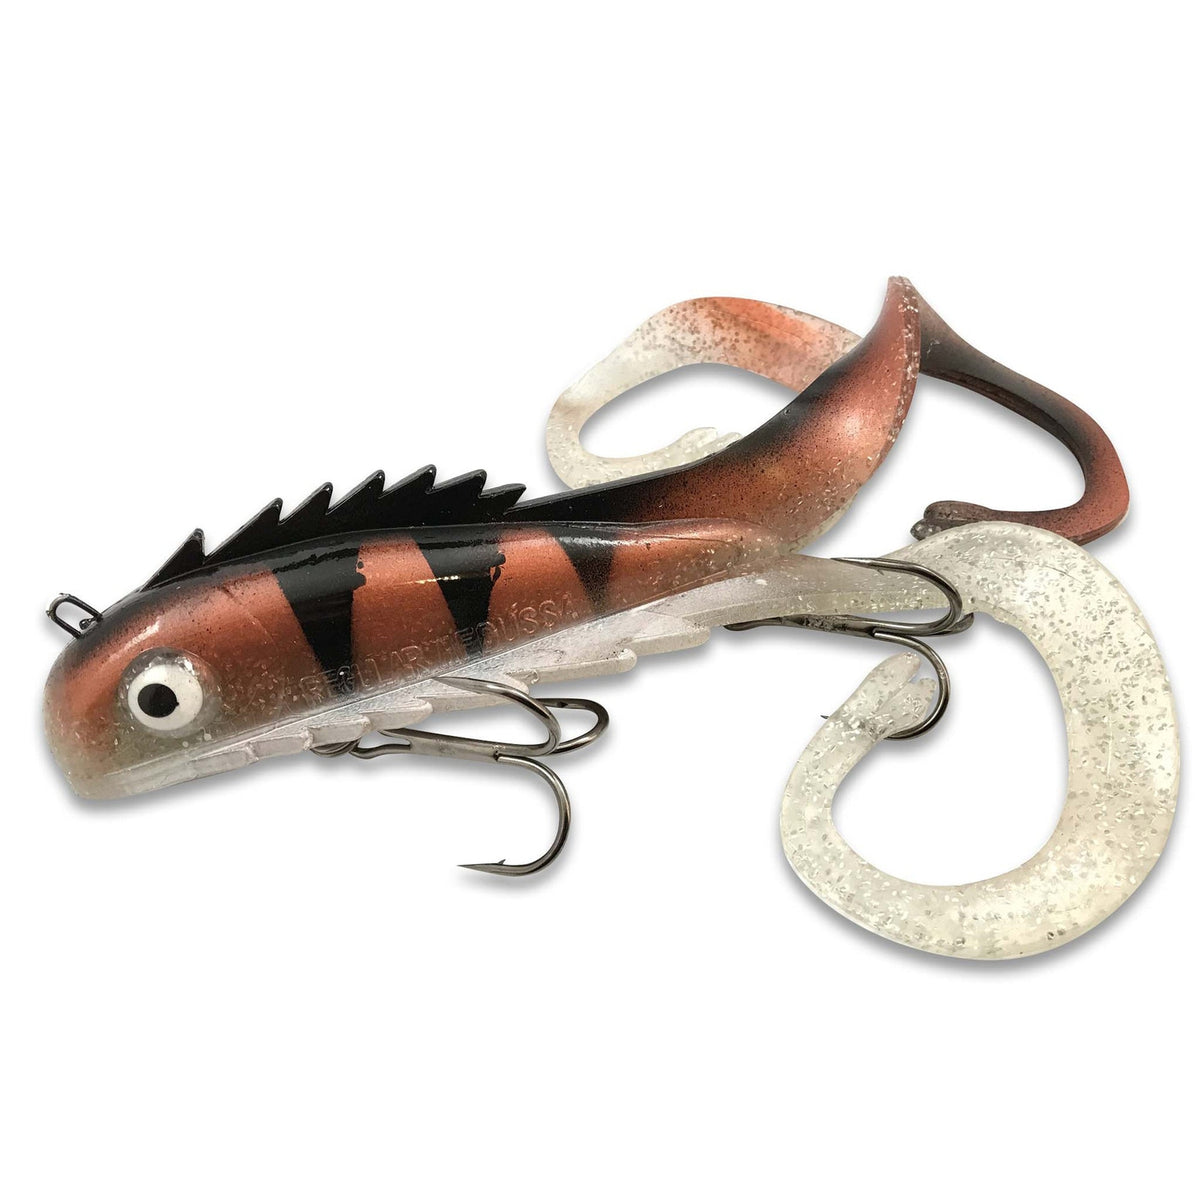 MuskieFIRST  Big bass swimbaits for musky? » Lures,Tackle, and Equipment »  Muskie Fishing